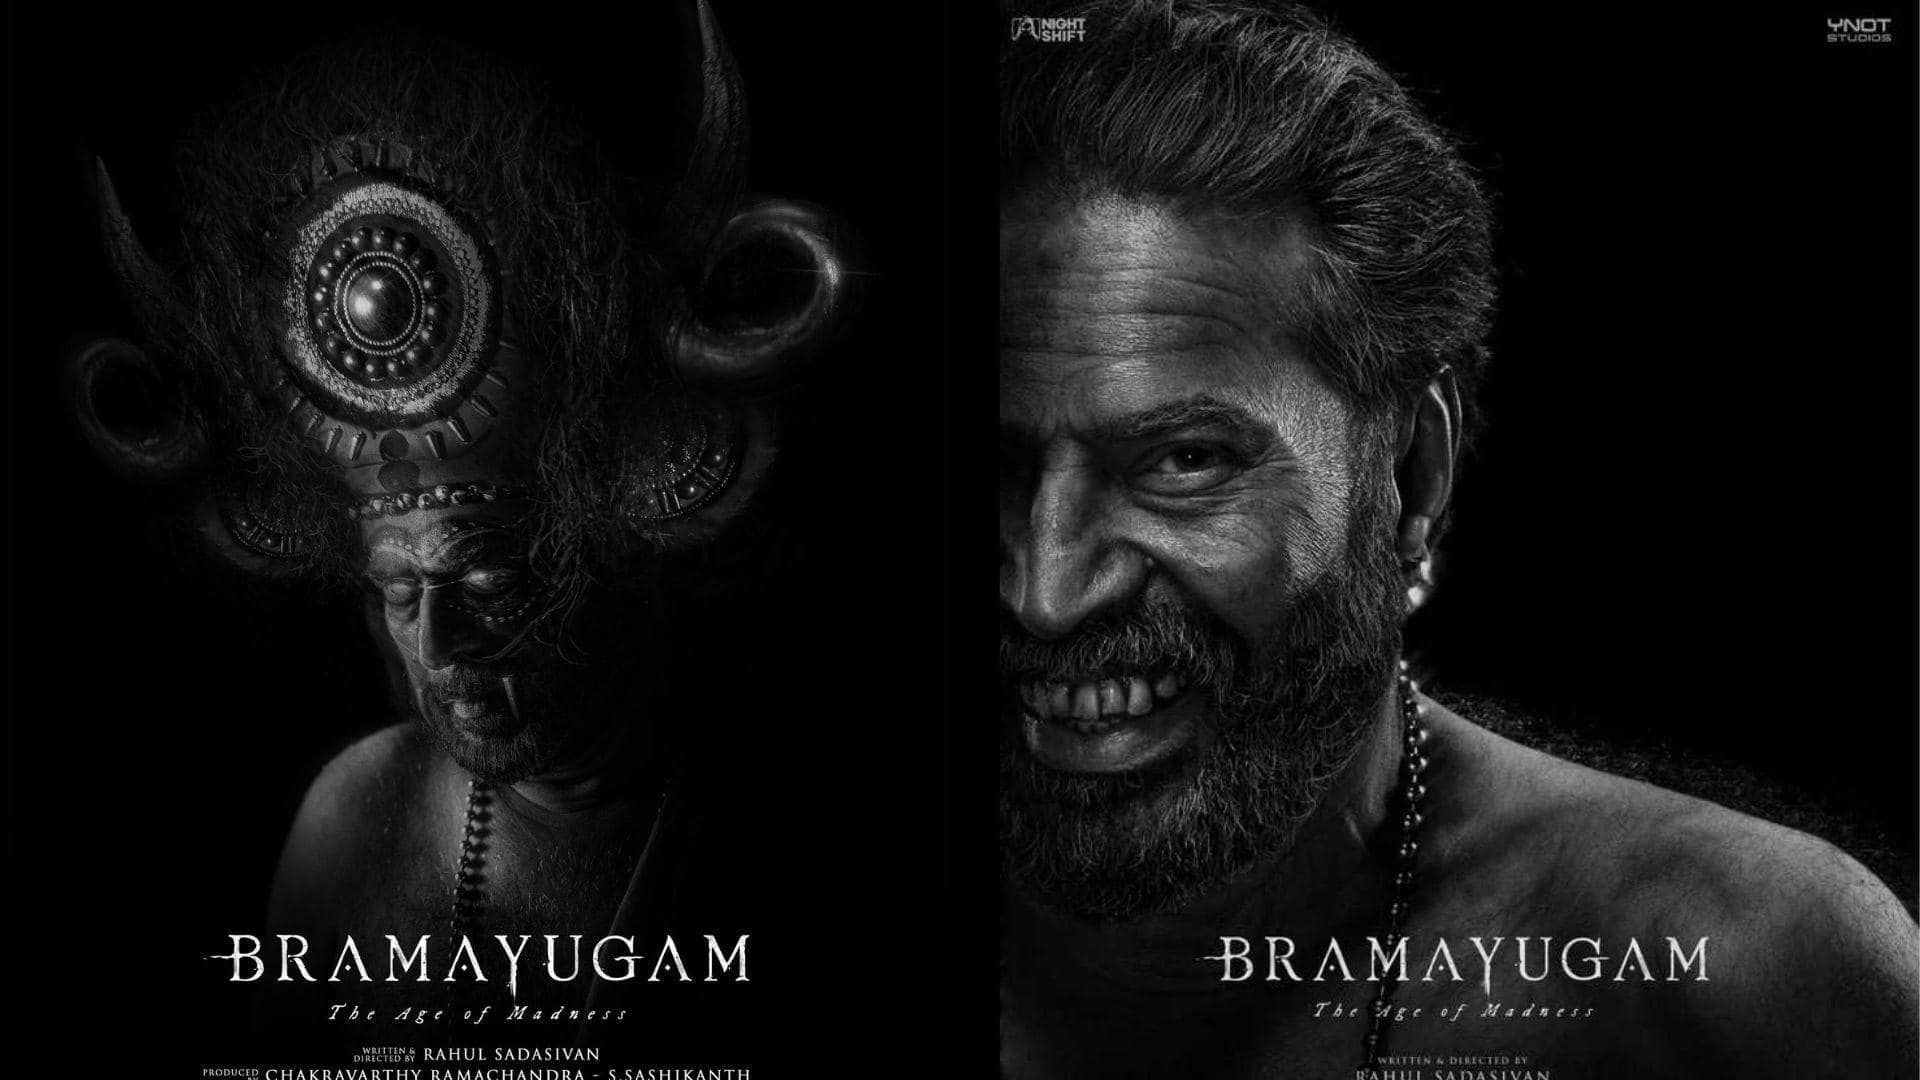 Amid name change, Mammootty clarifies details about his 'Bramayugam' character